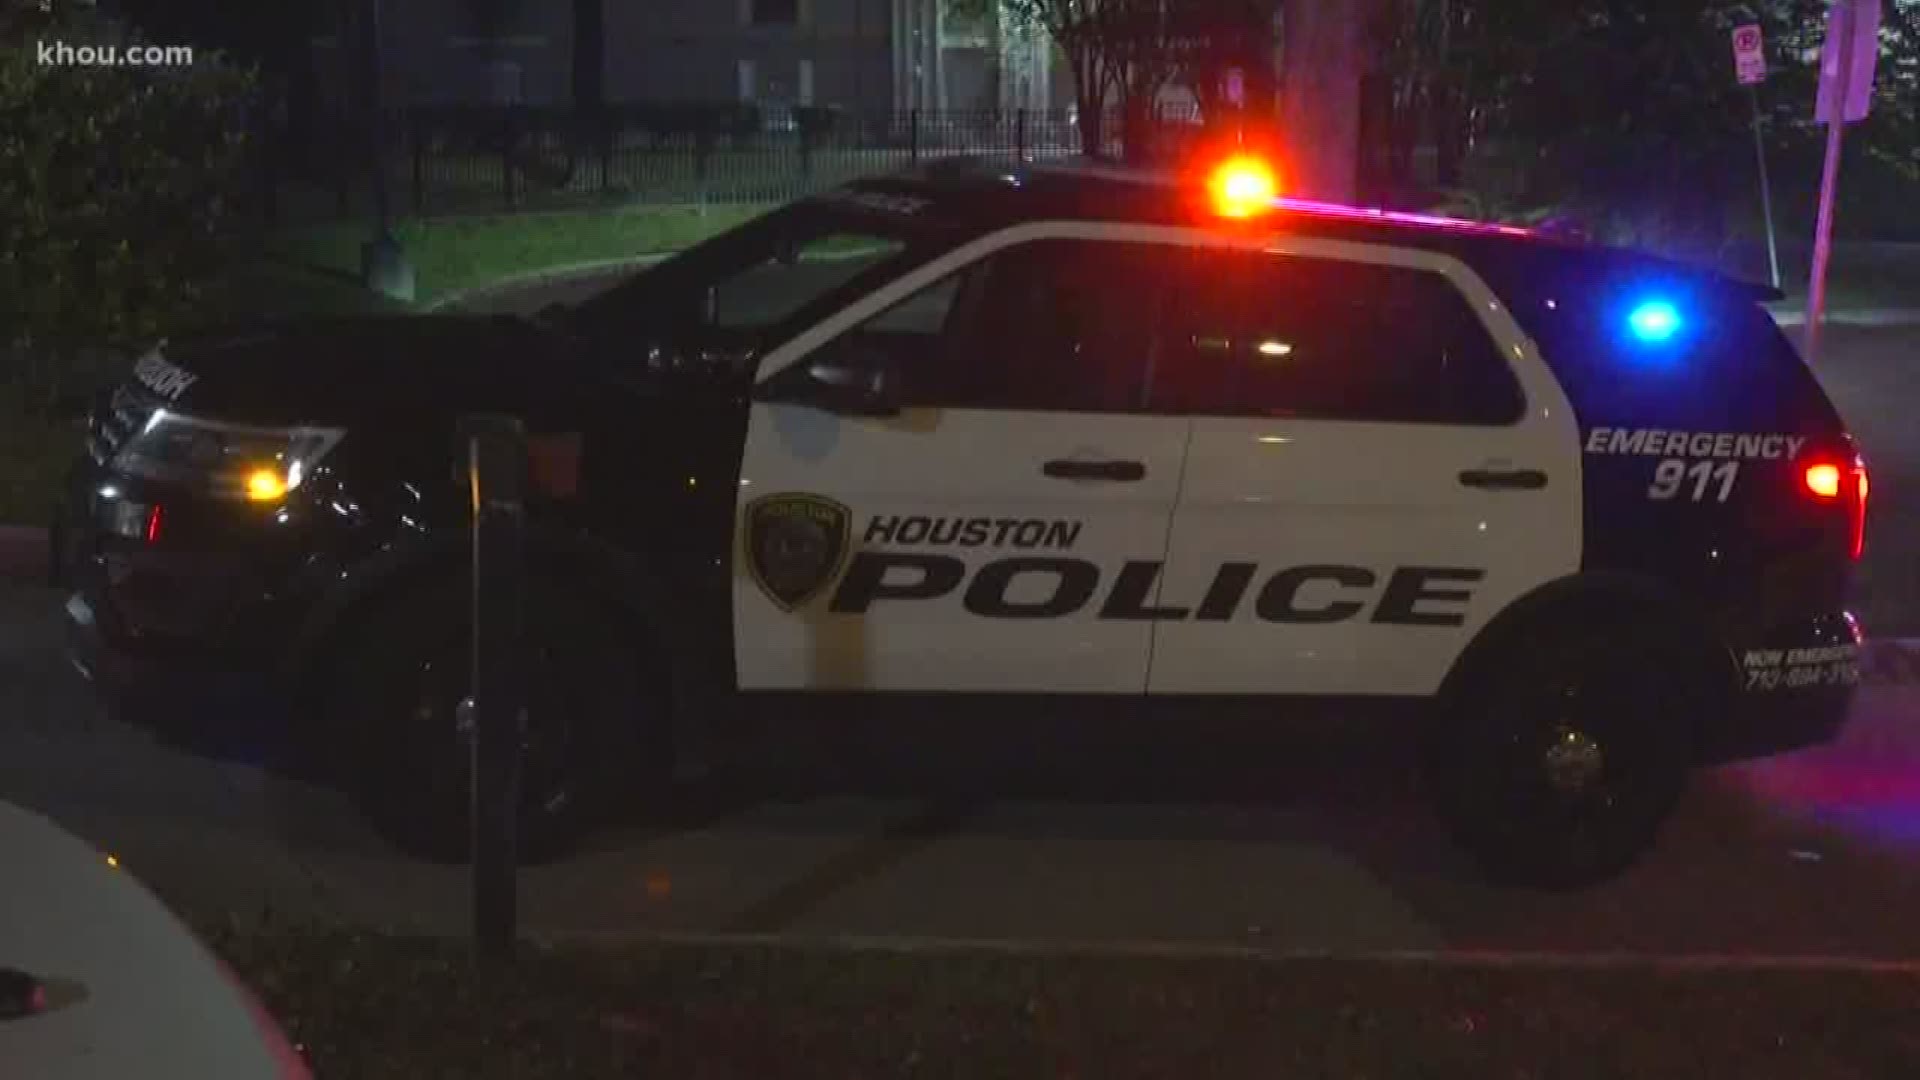 A man was found dead wearing only a shirt at a north Houston apartment complex. Police said it appears the man may have been run over or dragged by a car.